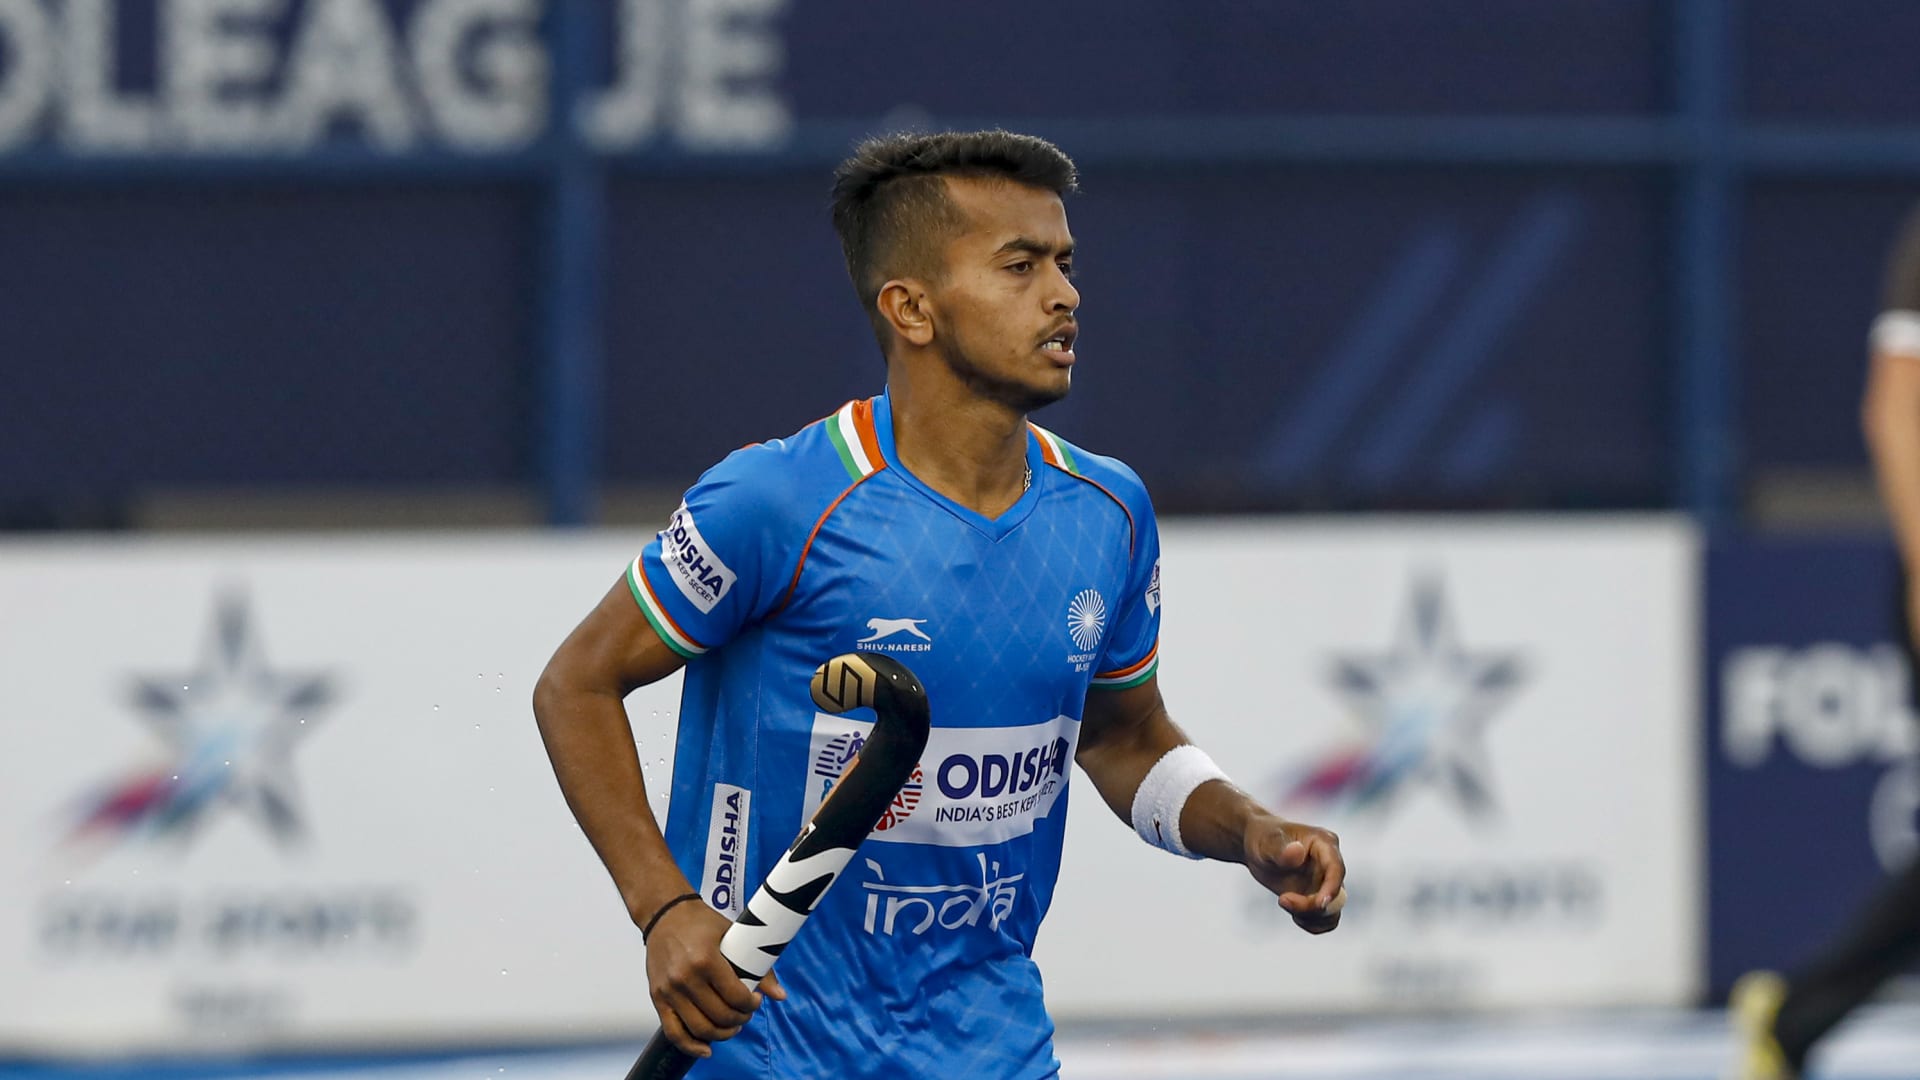 manpreet singh and rani rampal in the race for hockey india awards